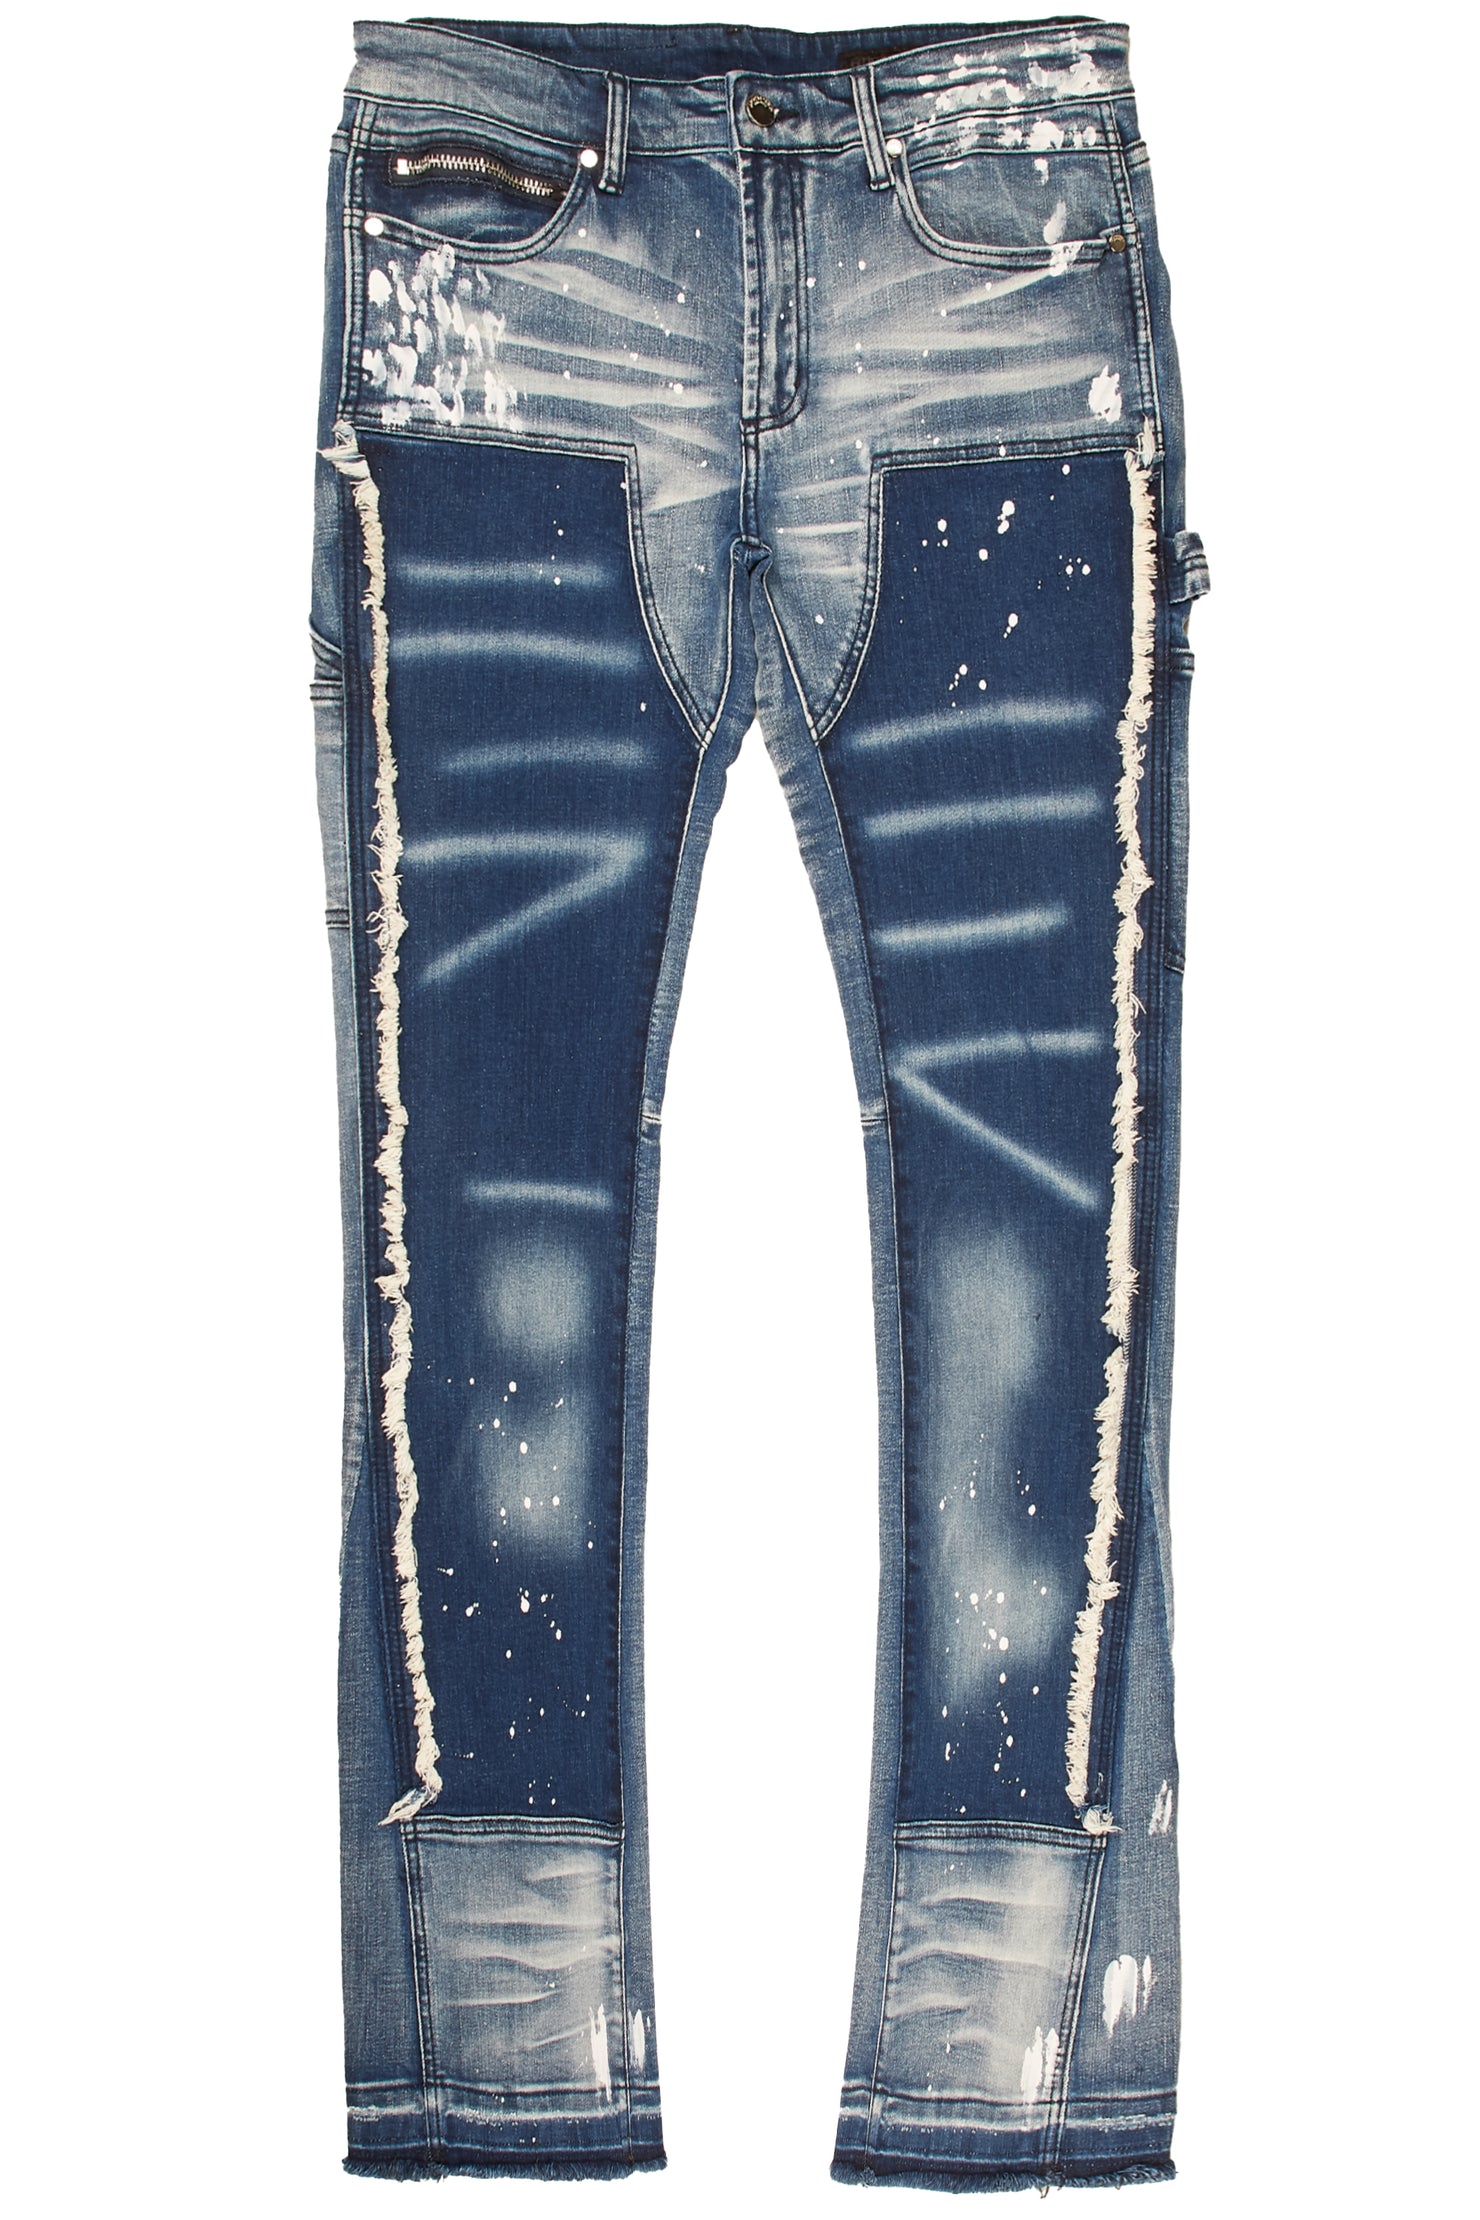 Carson Blue Stacked Flare Jean